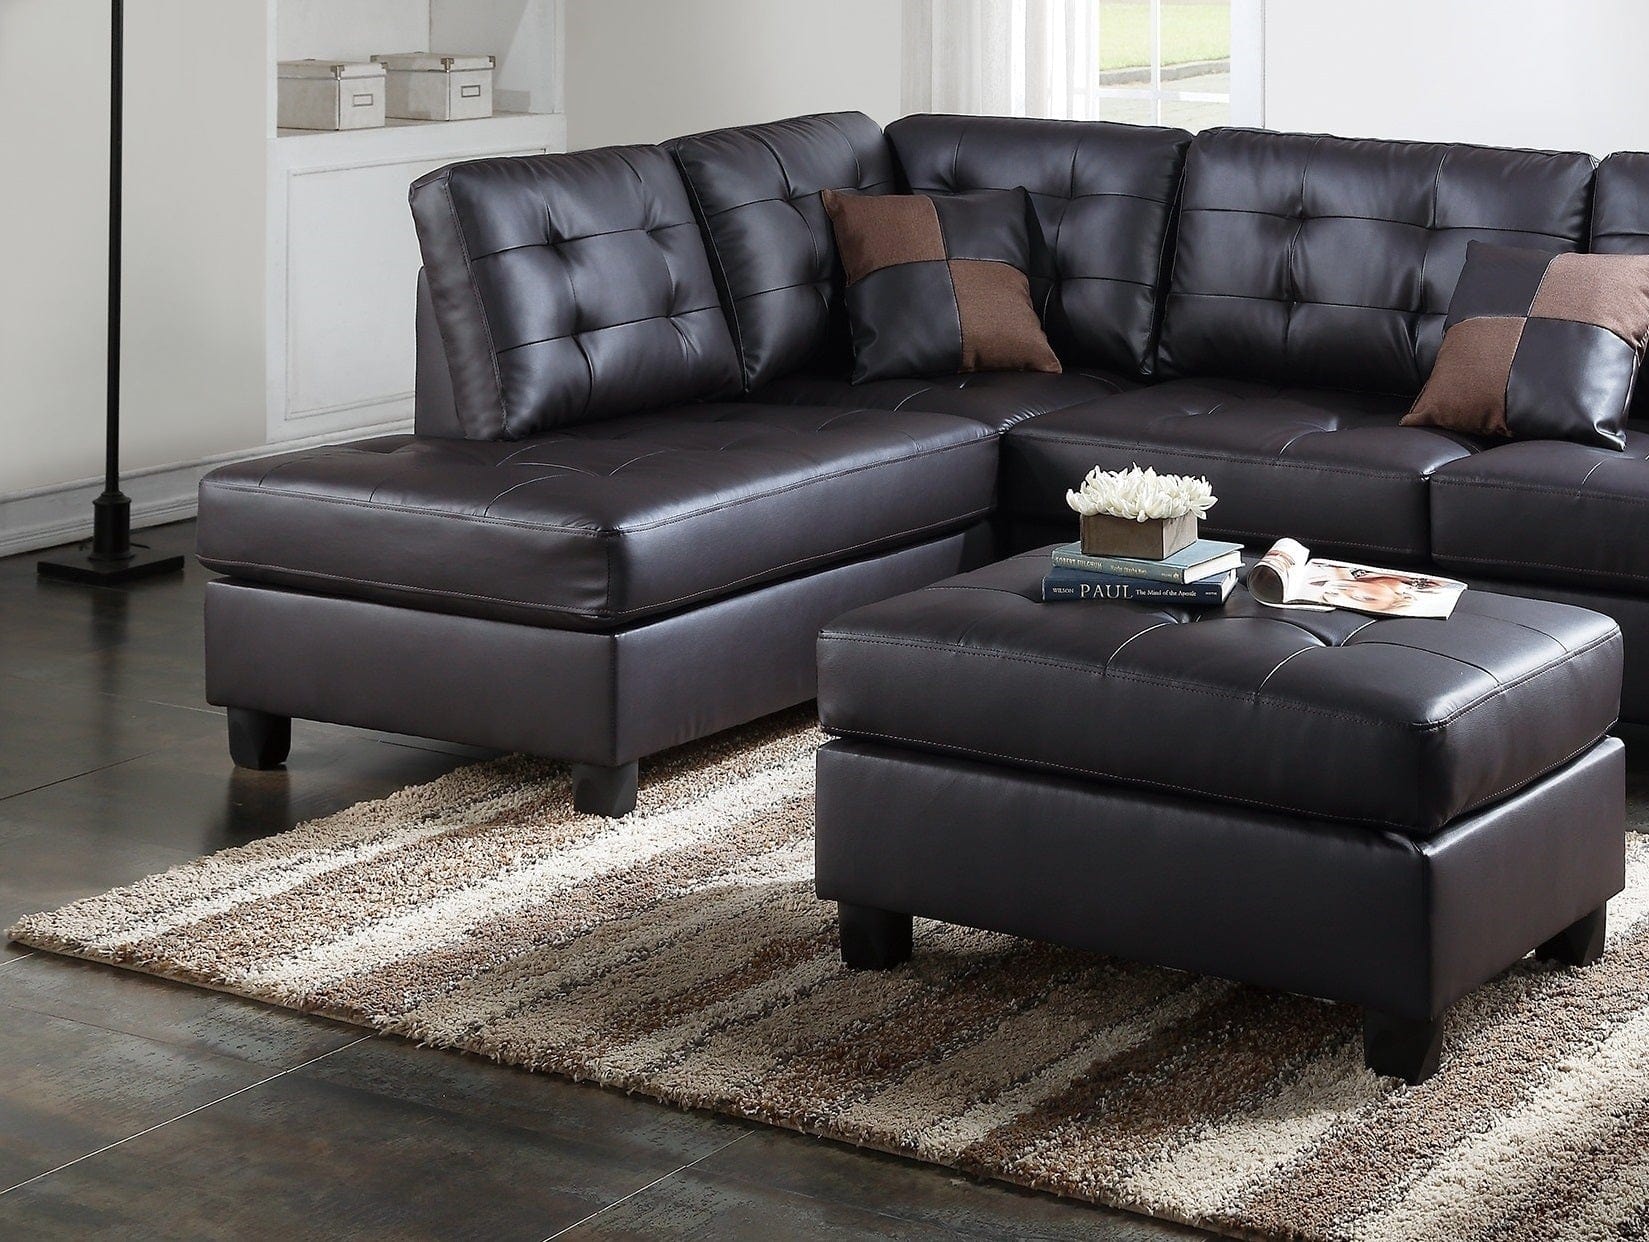 1st Choice Furniture Direct Sectional Sofa 1st Choice Contemporary Espresso Faux Leather 3pc Sectional Sofa